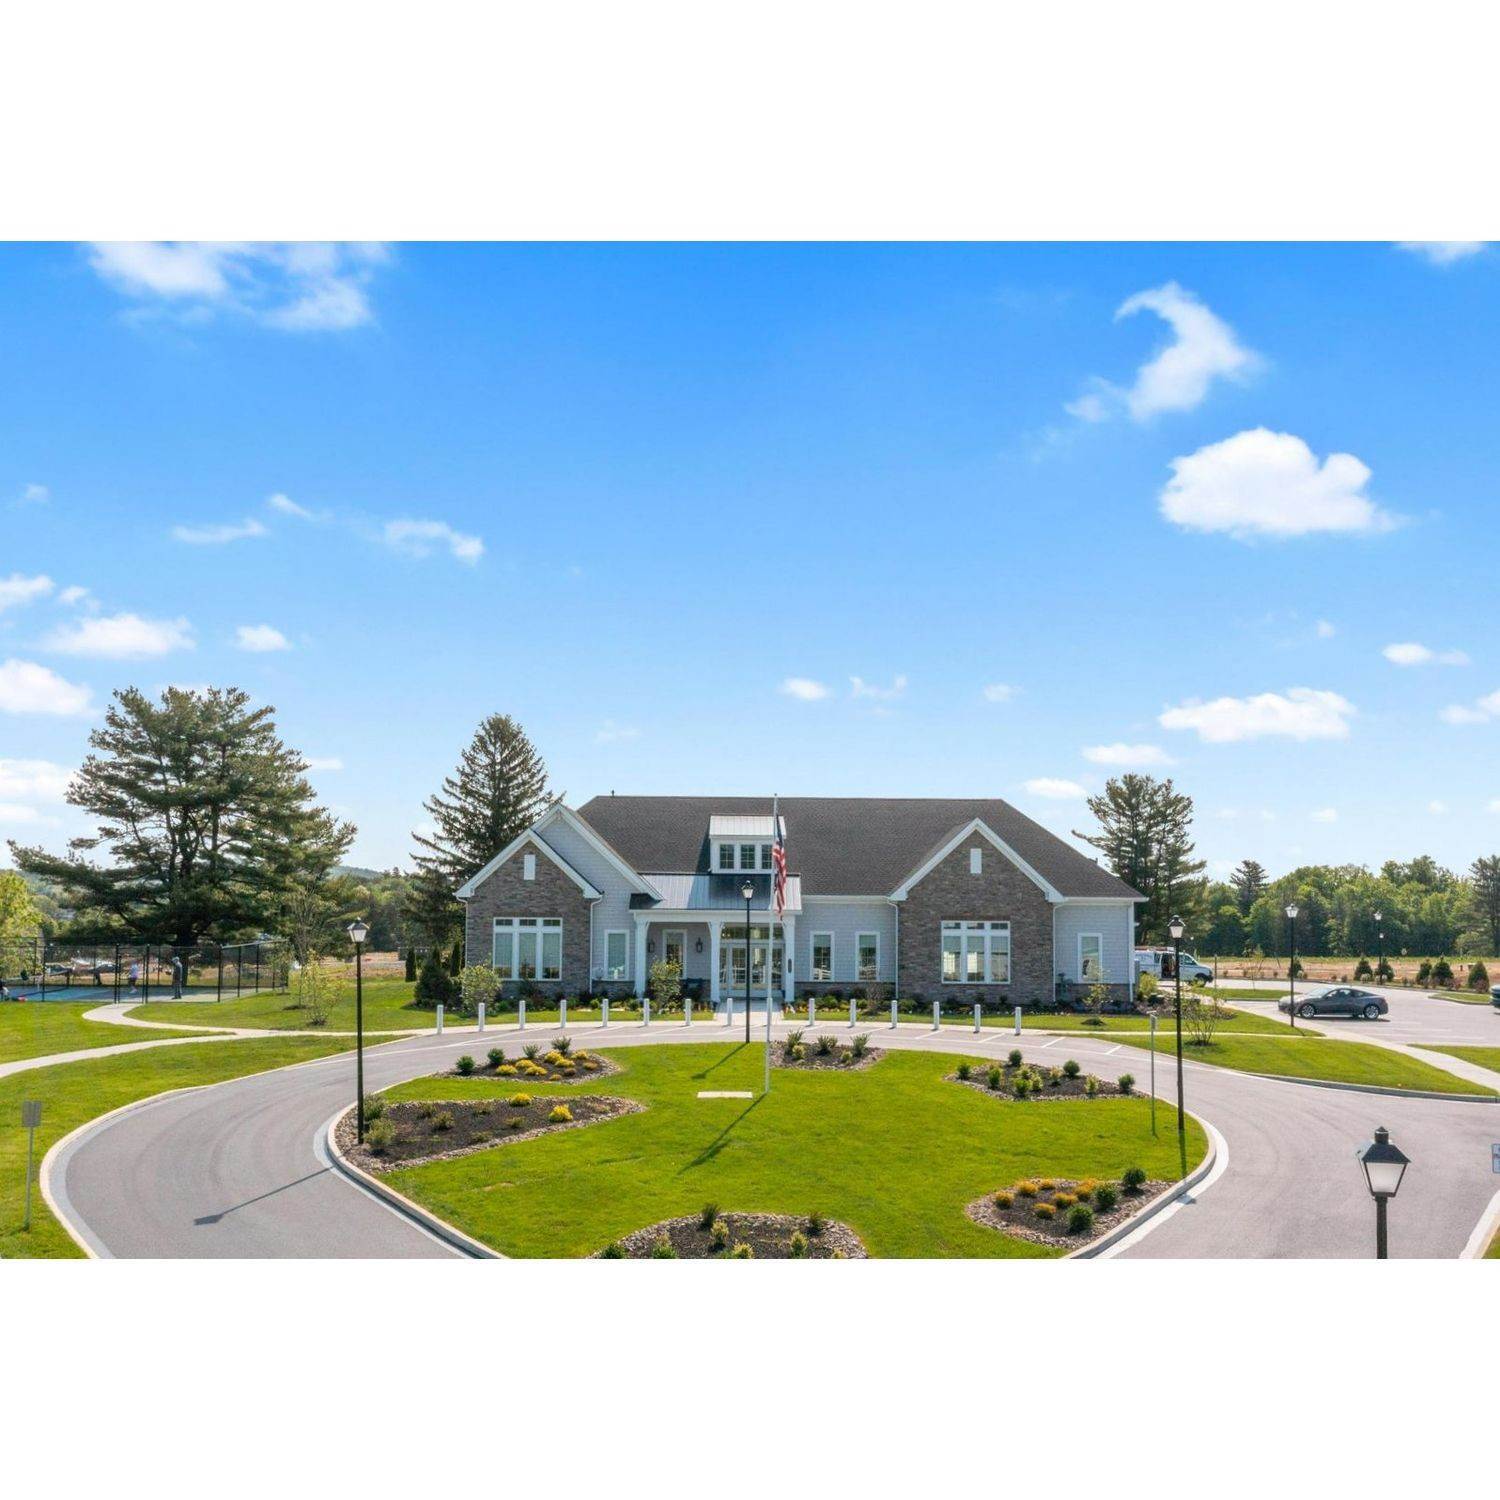 13. Locust Valley 55+ Living xây dựng tại 7432 Presidents Drive, Coopersburg, PA 18036